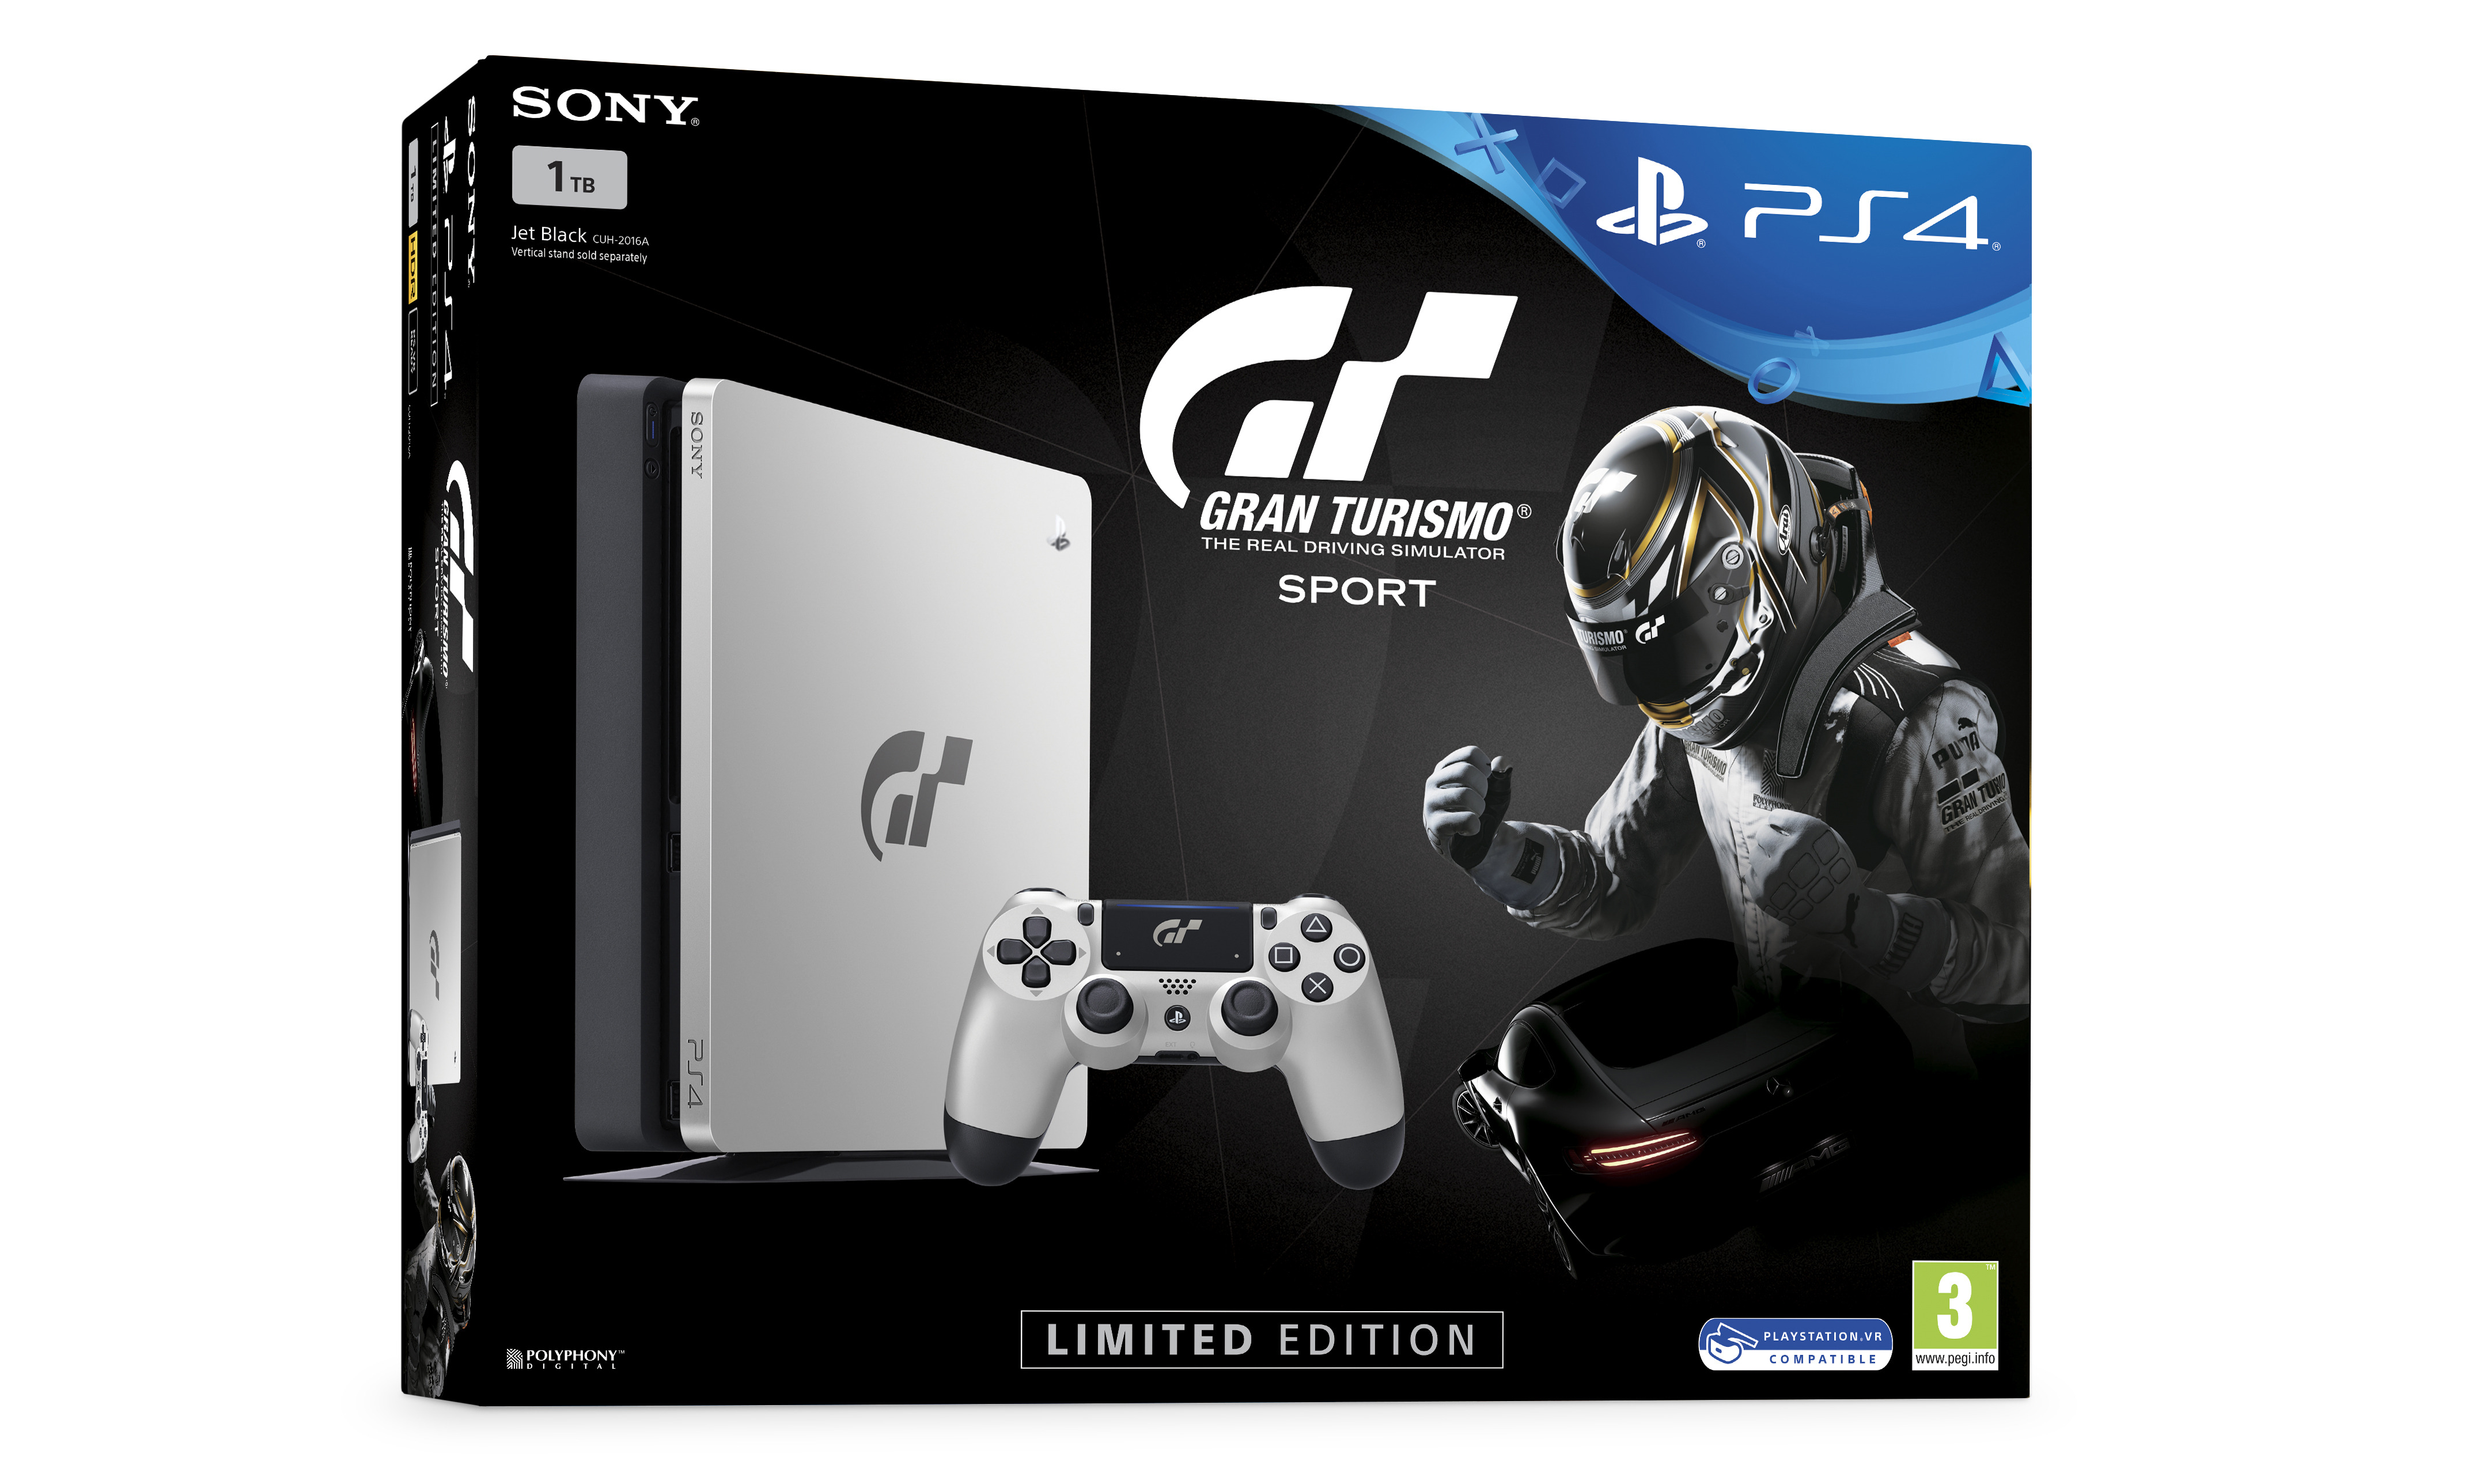 New PS4 Special Edition Features Gran Sport-Inspired Design GameSpot